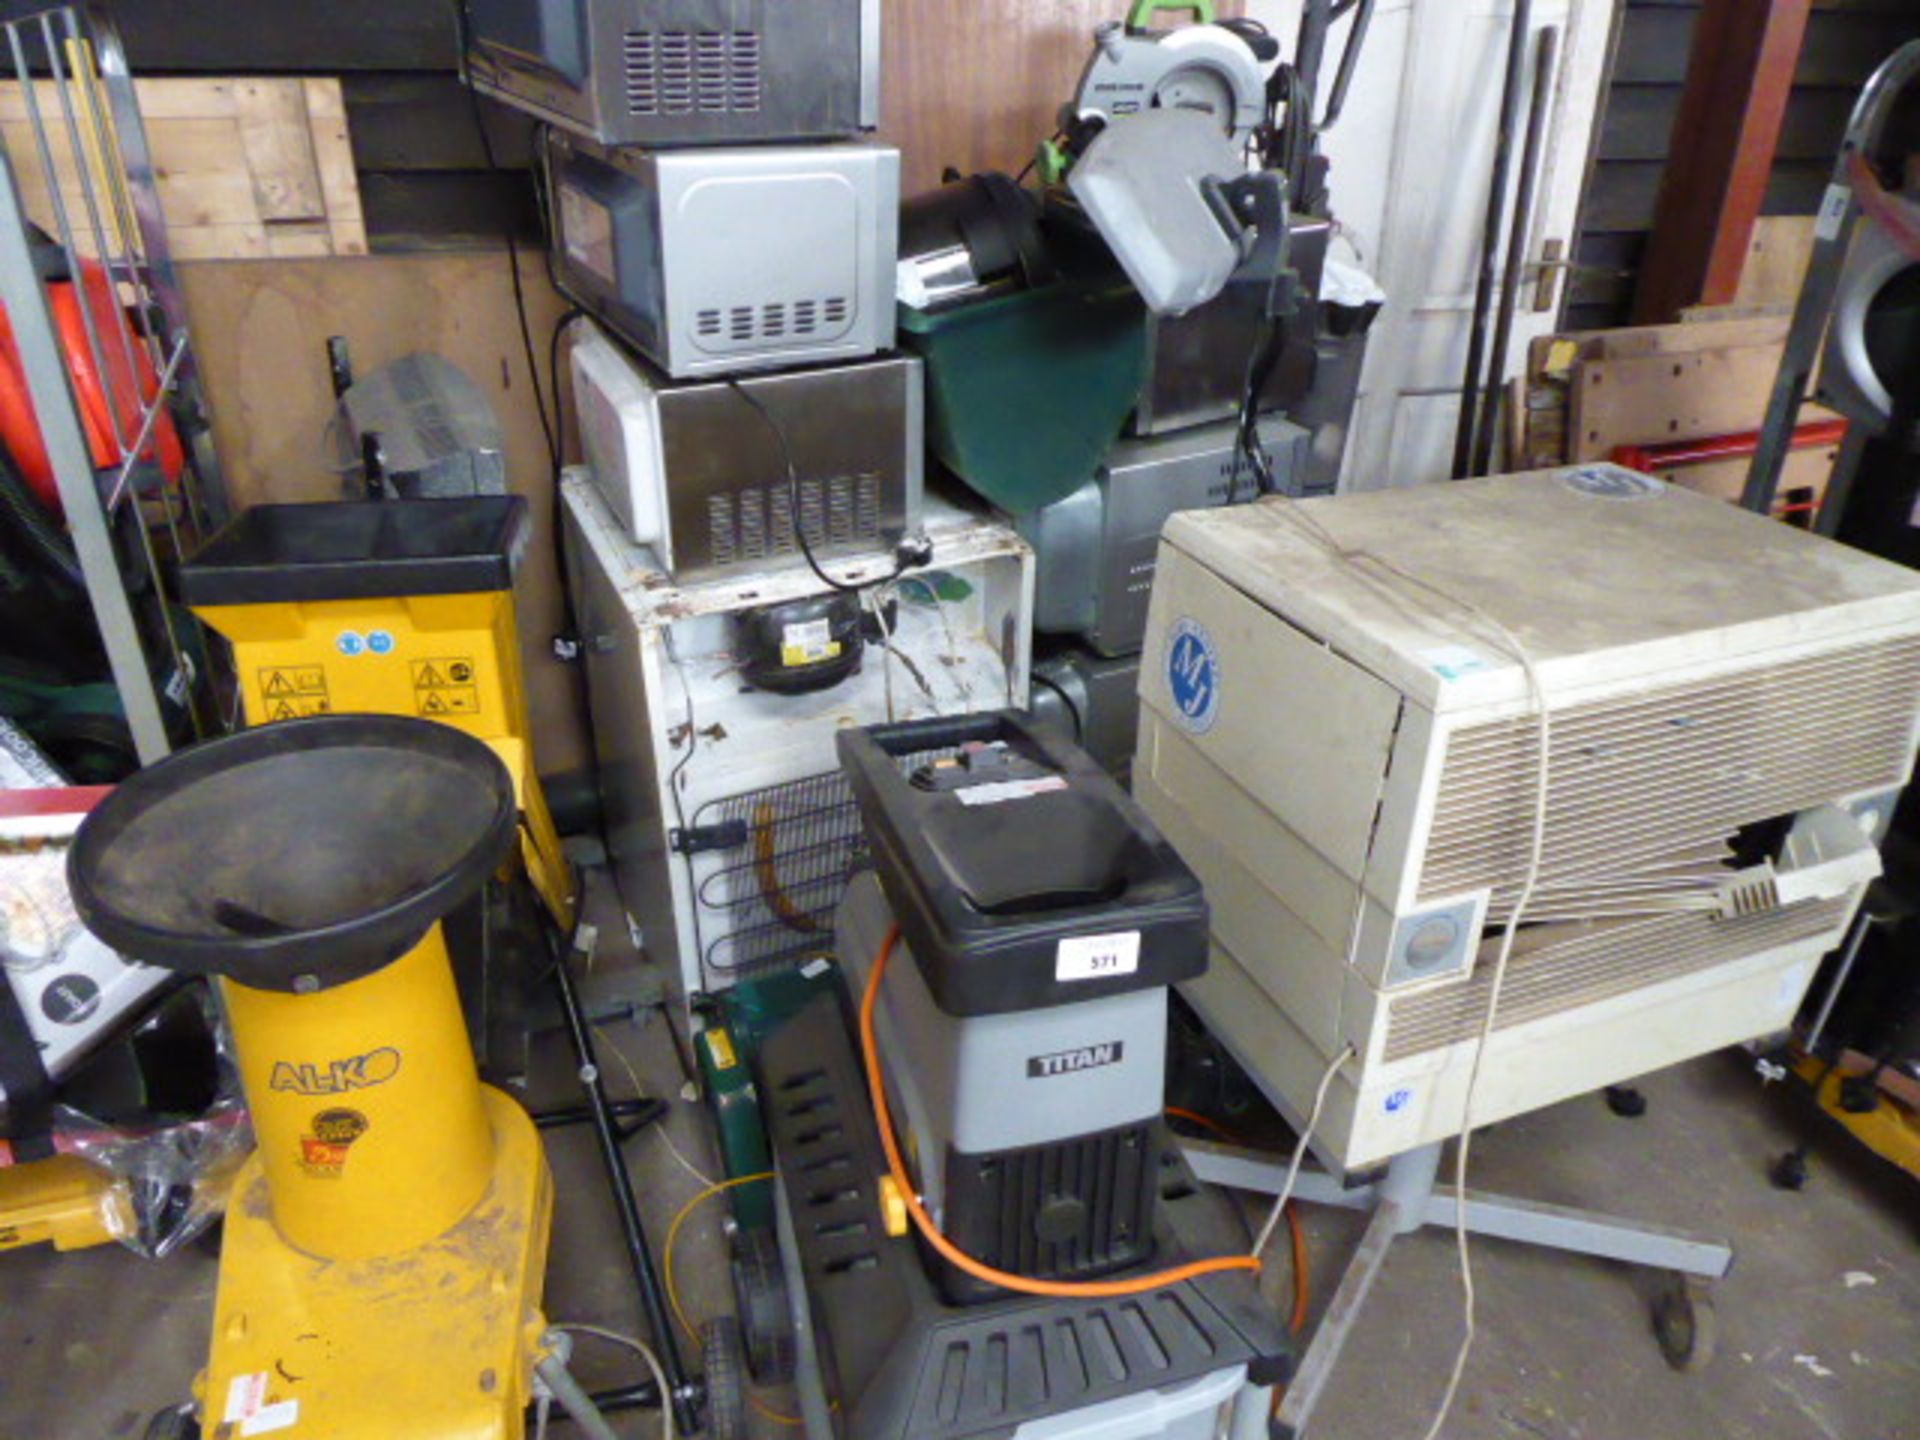 Approx. 15 items of trade electrical items for spares or repairs only incl. microwaves, vacuum